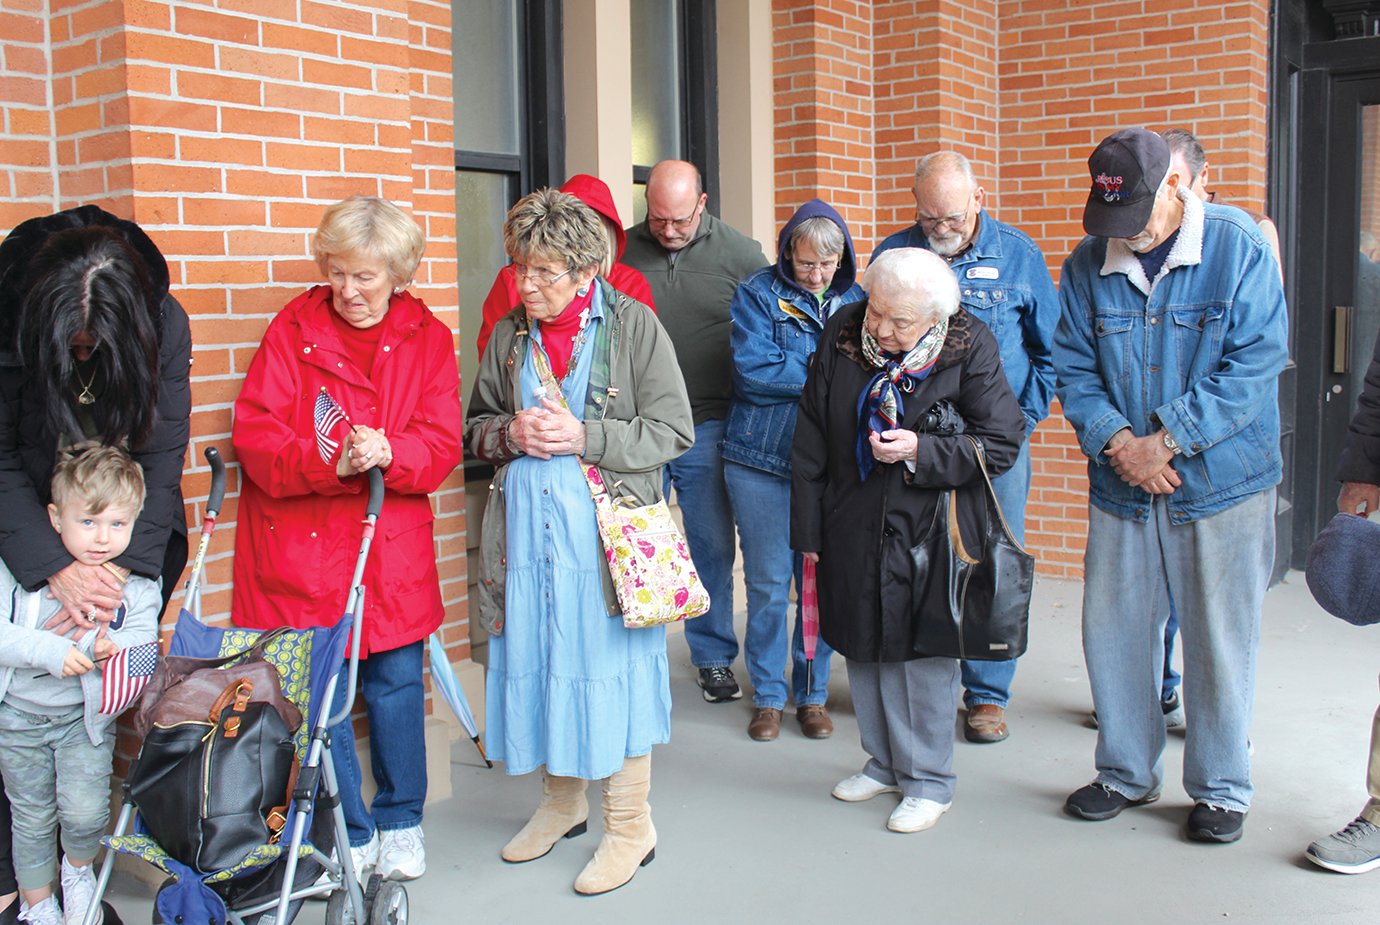 A group of devoted Christians bow their heads during one of the many prayers spoken aloud Thursday on the courthouse patio.